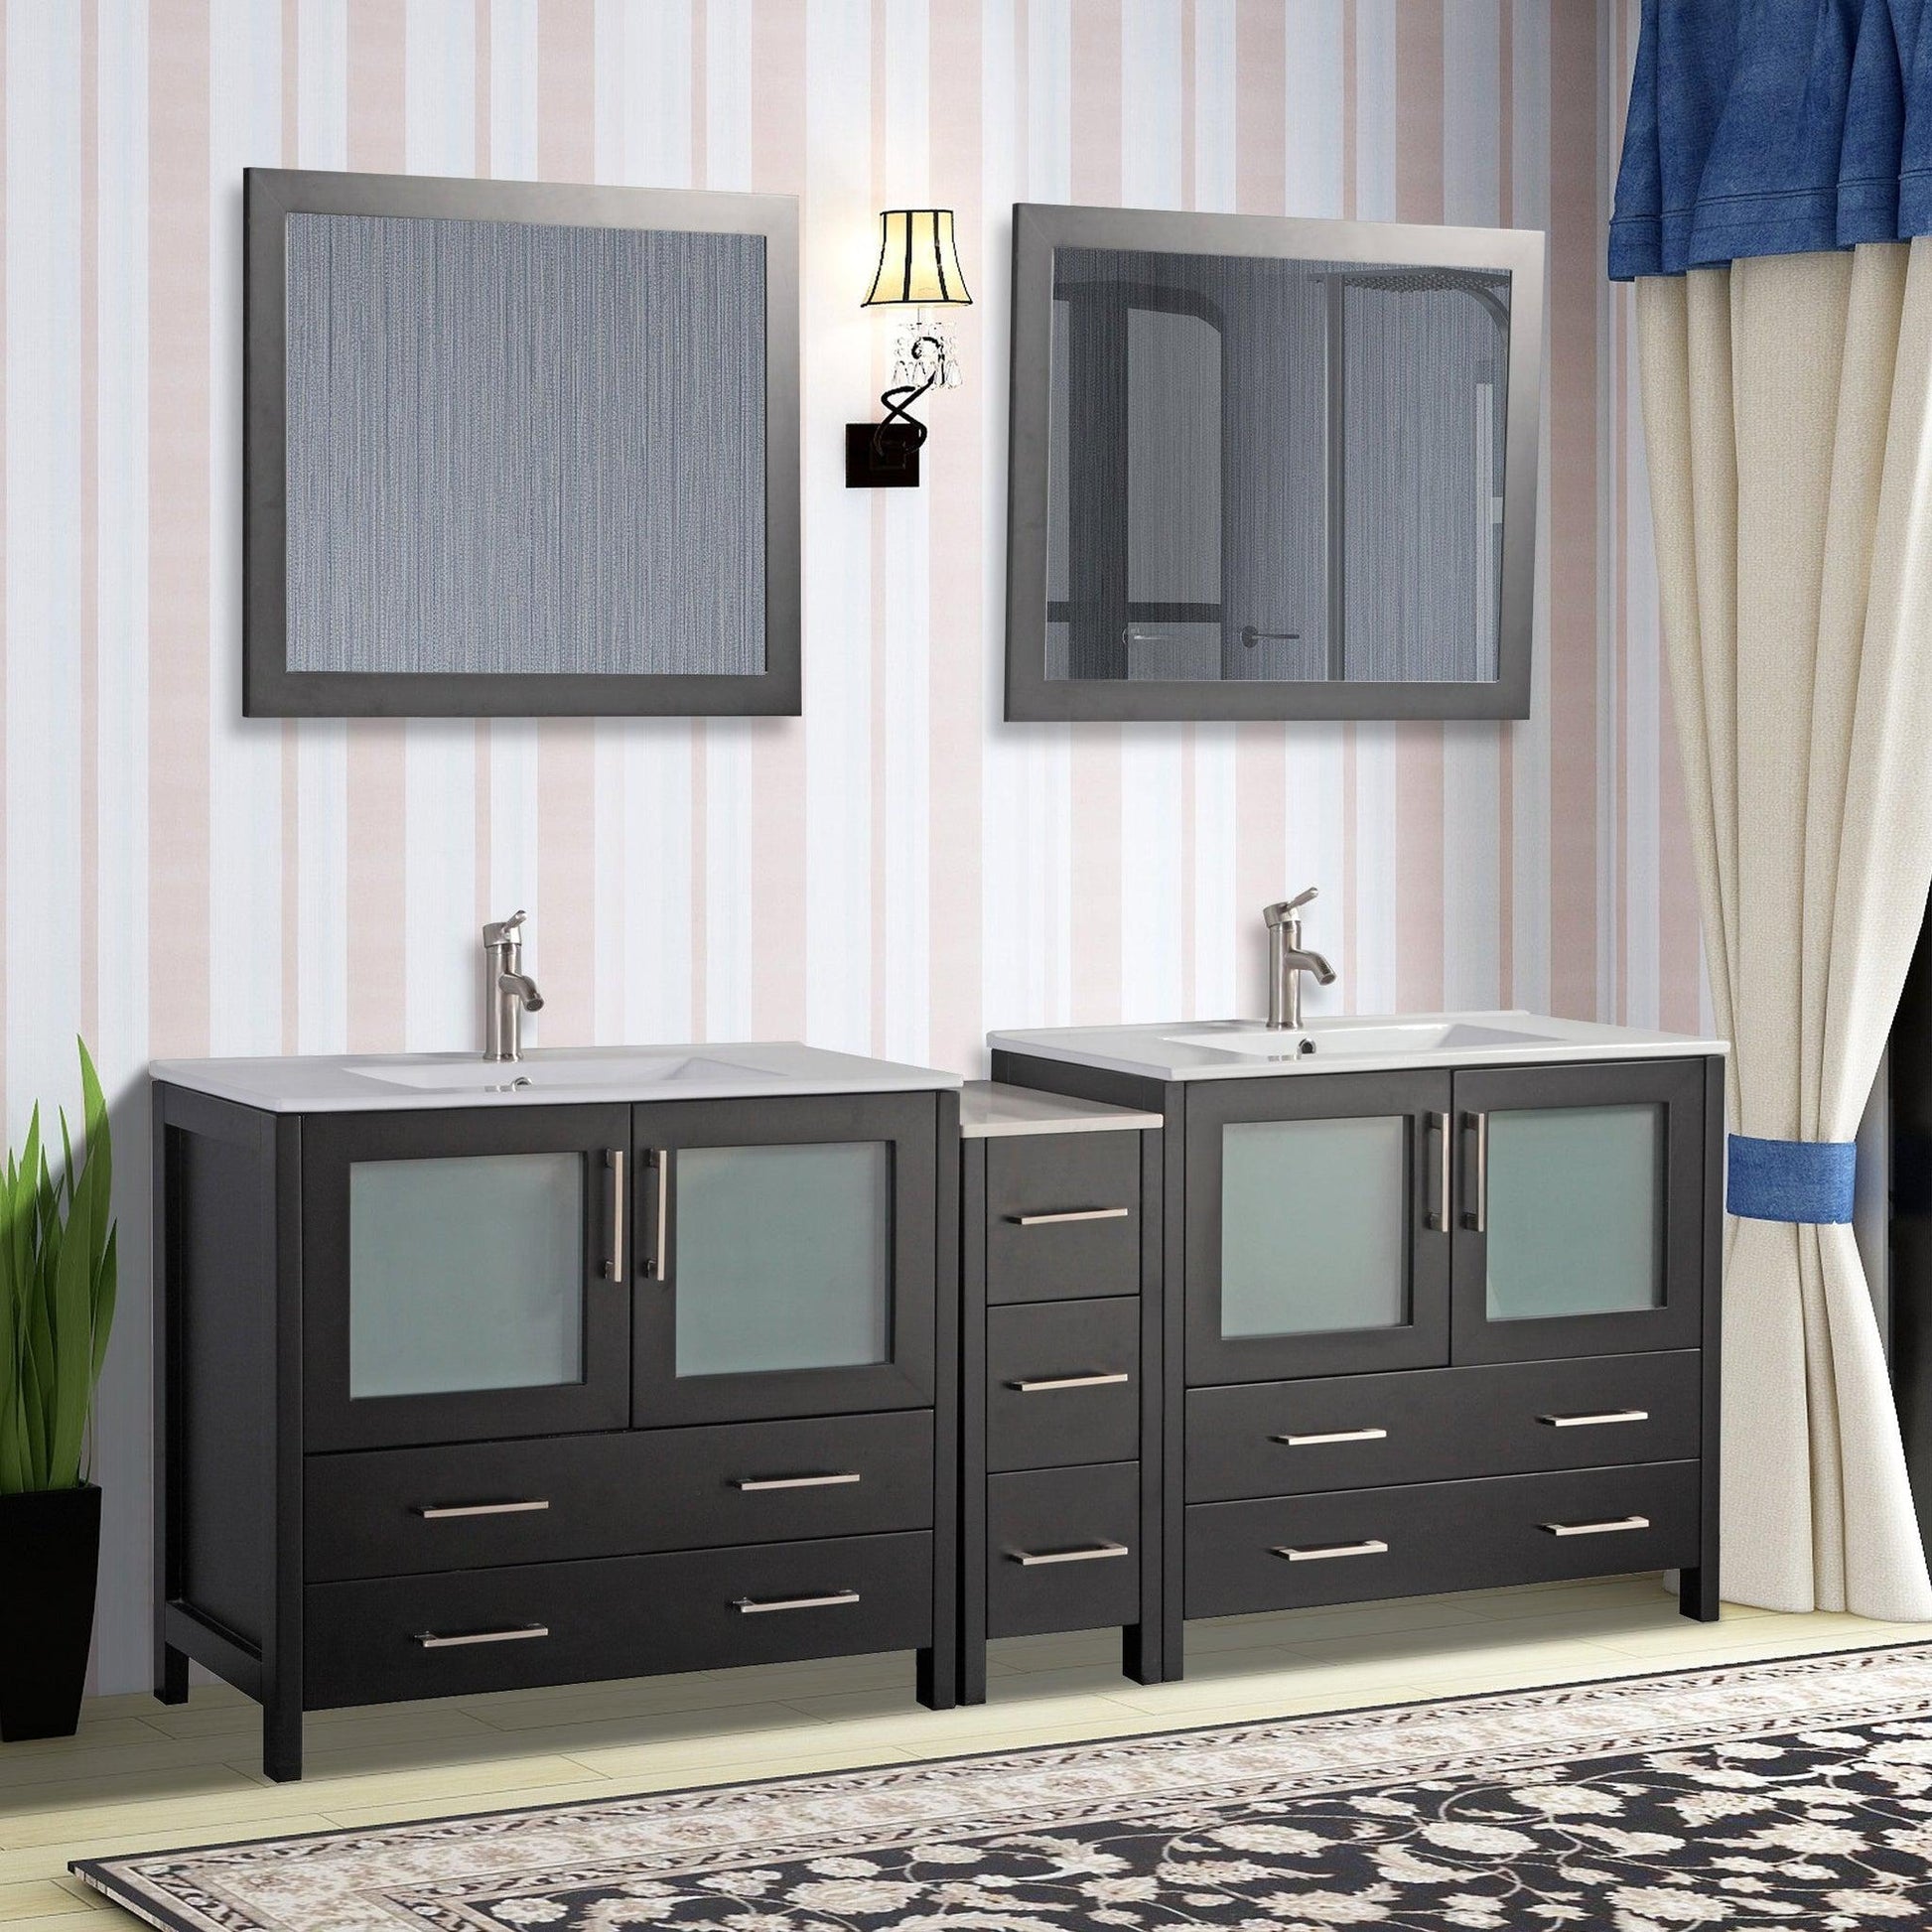 Vanity Art Brescia 84" Double Espresso Freestanding Modern Bathroom Vanity Set With Integrated Ceramic Sink, 1 Side Cabinet and 2 Mirrors